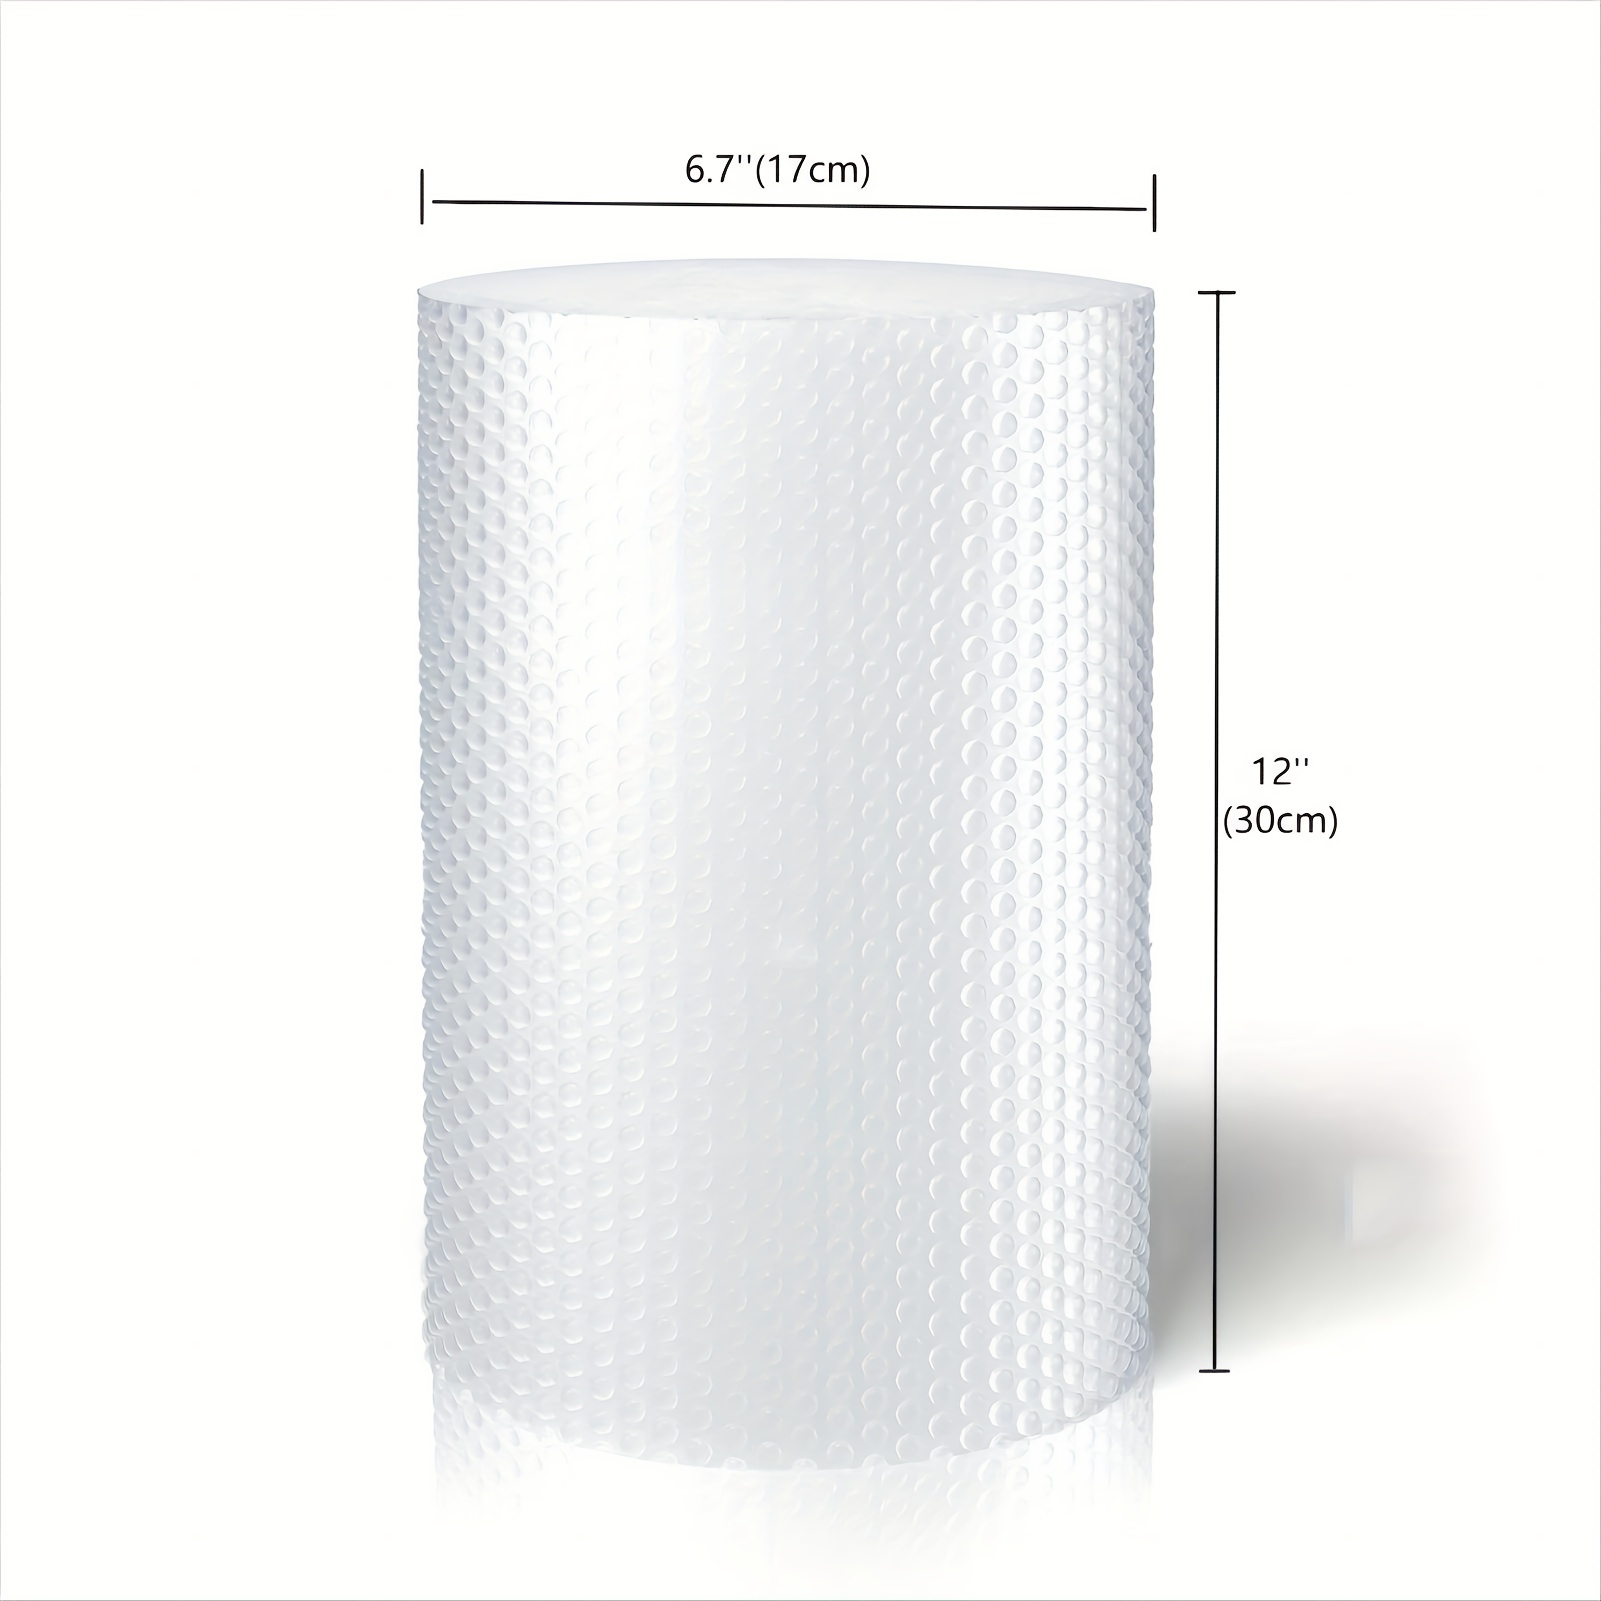  MAILERVIEW Air Bubble Cushioning Wrap Roll for Heavy-Duty  Packing [12 Inch x 72 Feet Total, Perforated Every 12], 2 Pack 36 Each  Roll. (30 Fragile Stickers Included) (12x72' / 2 Rolls) : Office Products